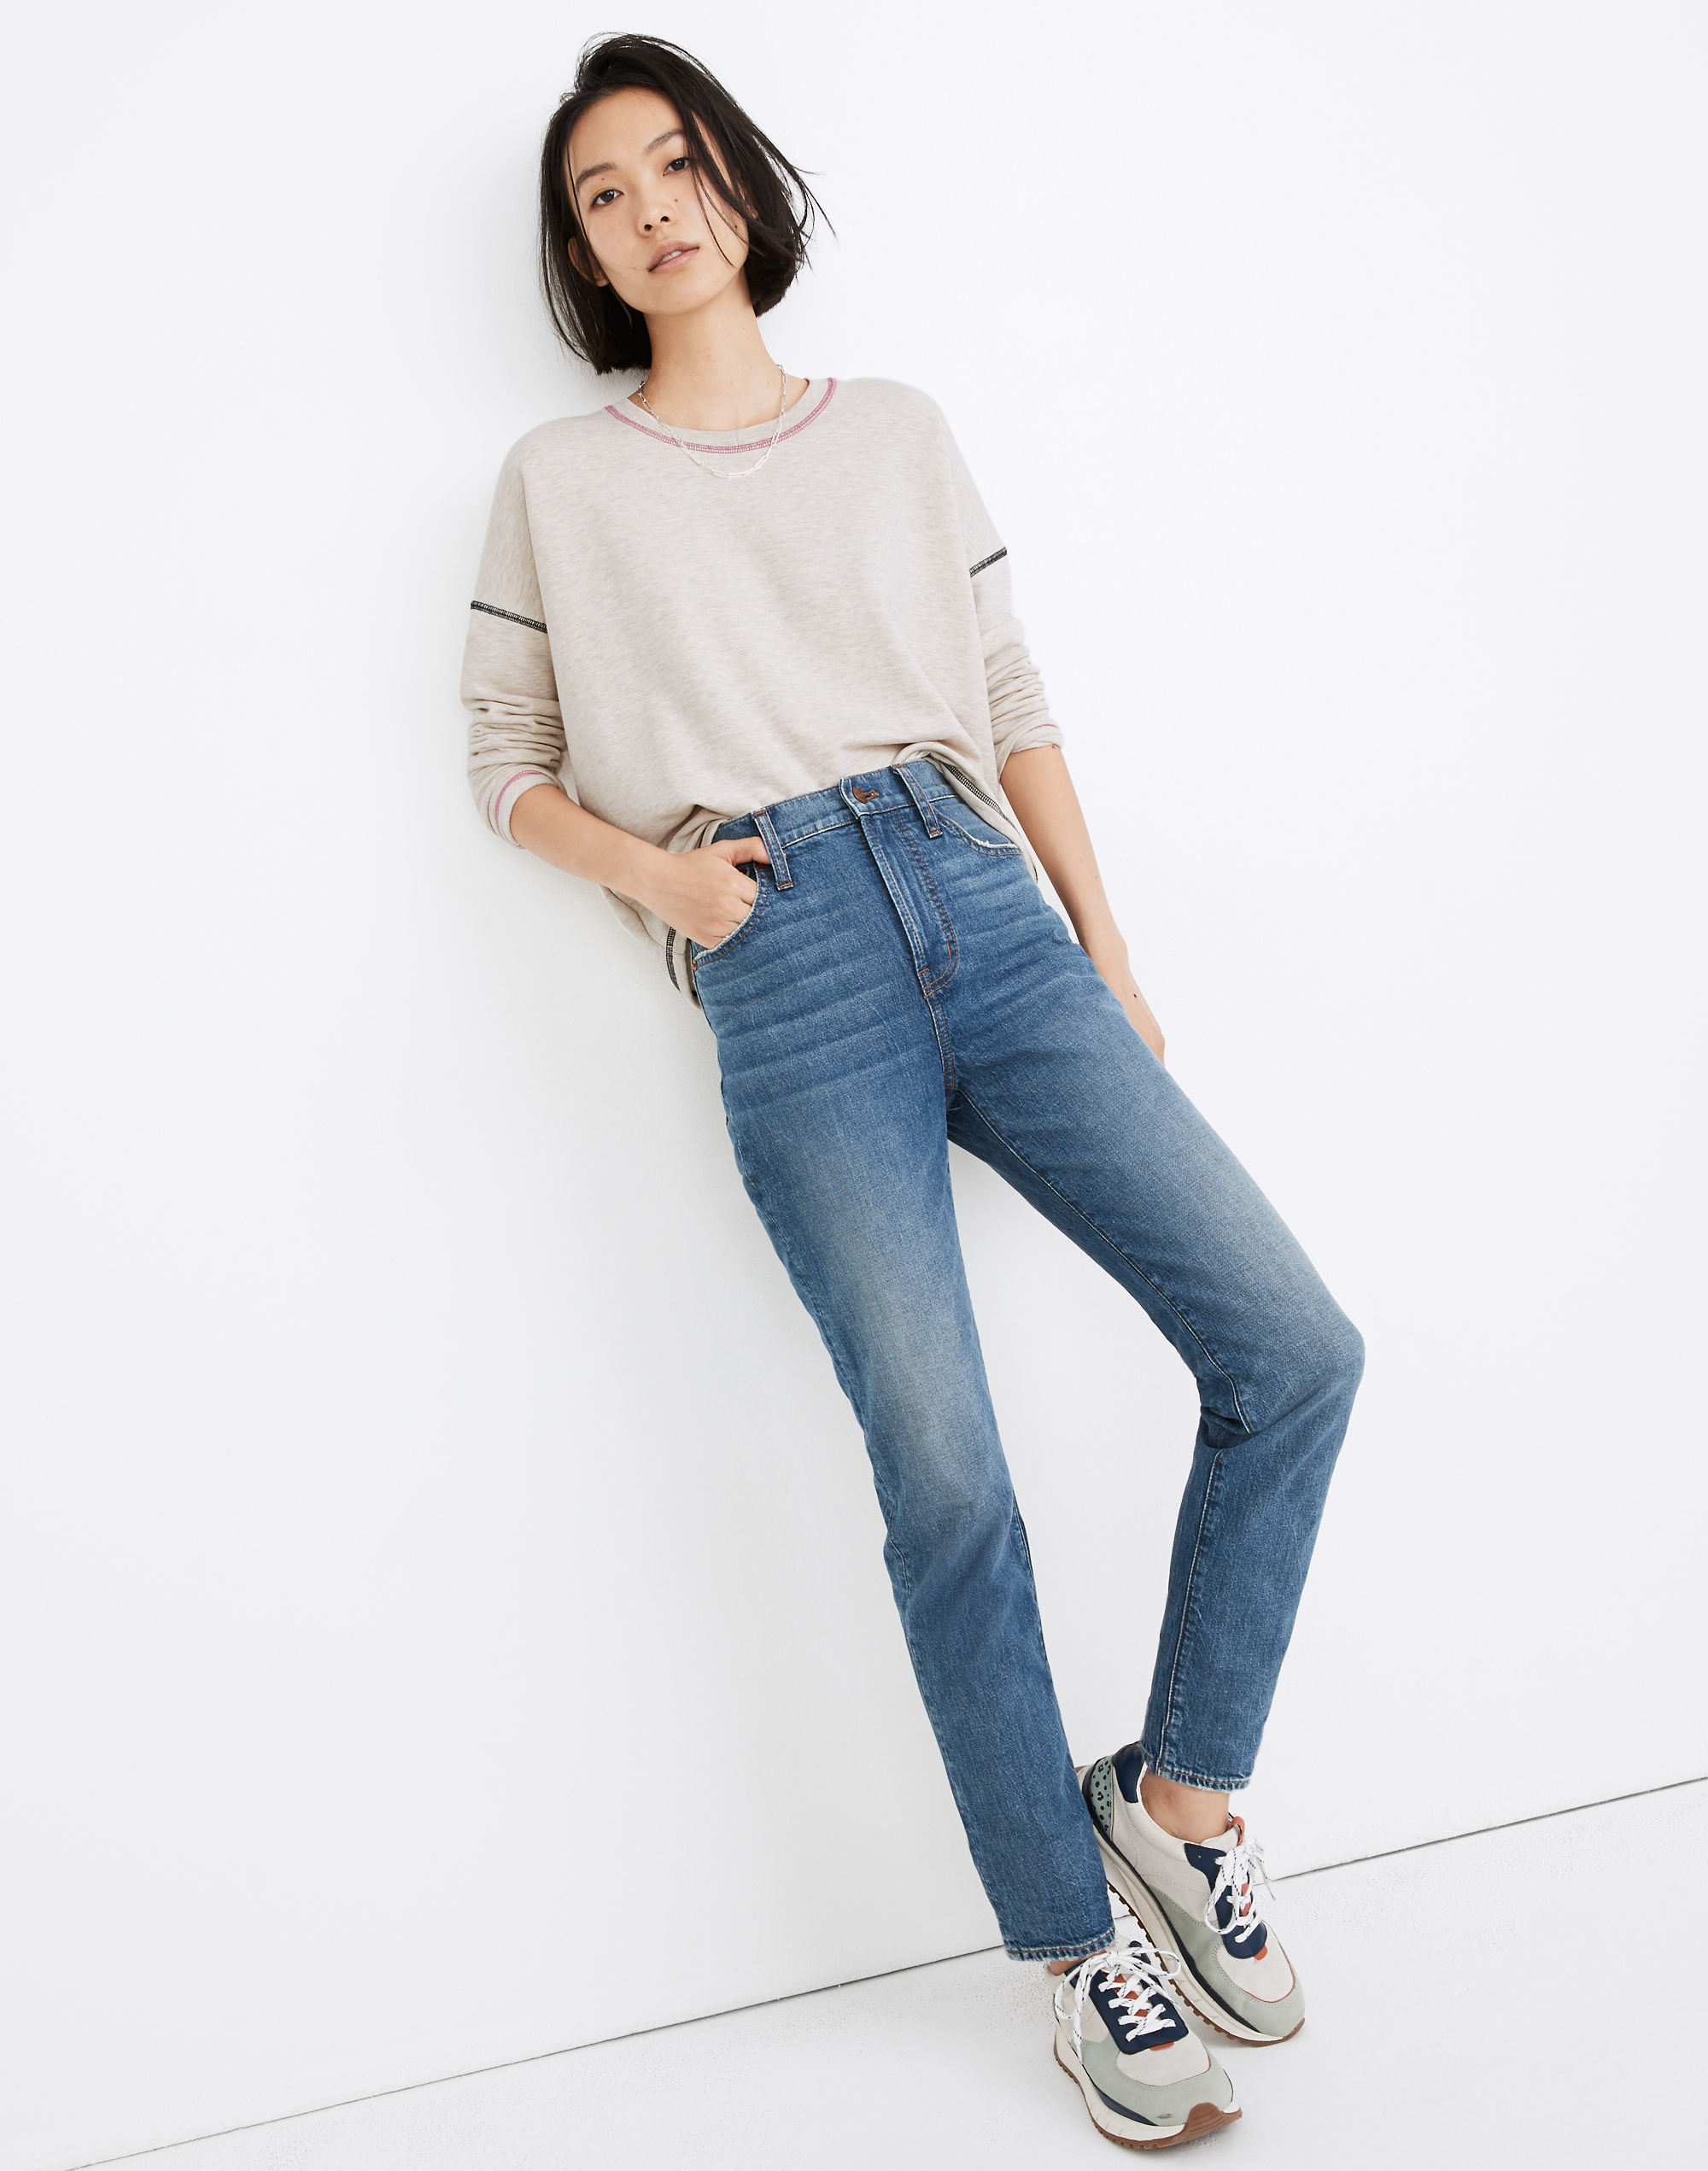 Madewell Petites Sale & Perfect Vintage Jeans Review